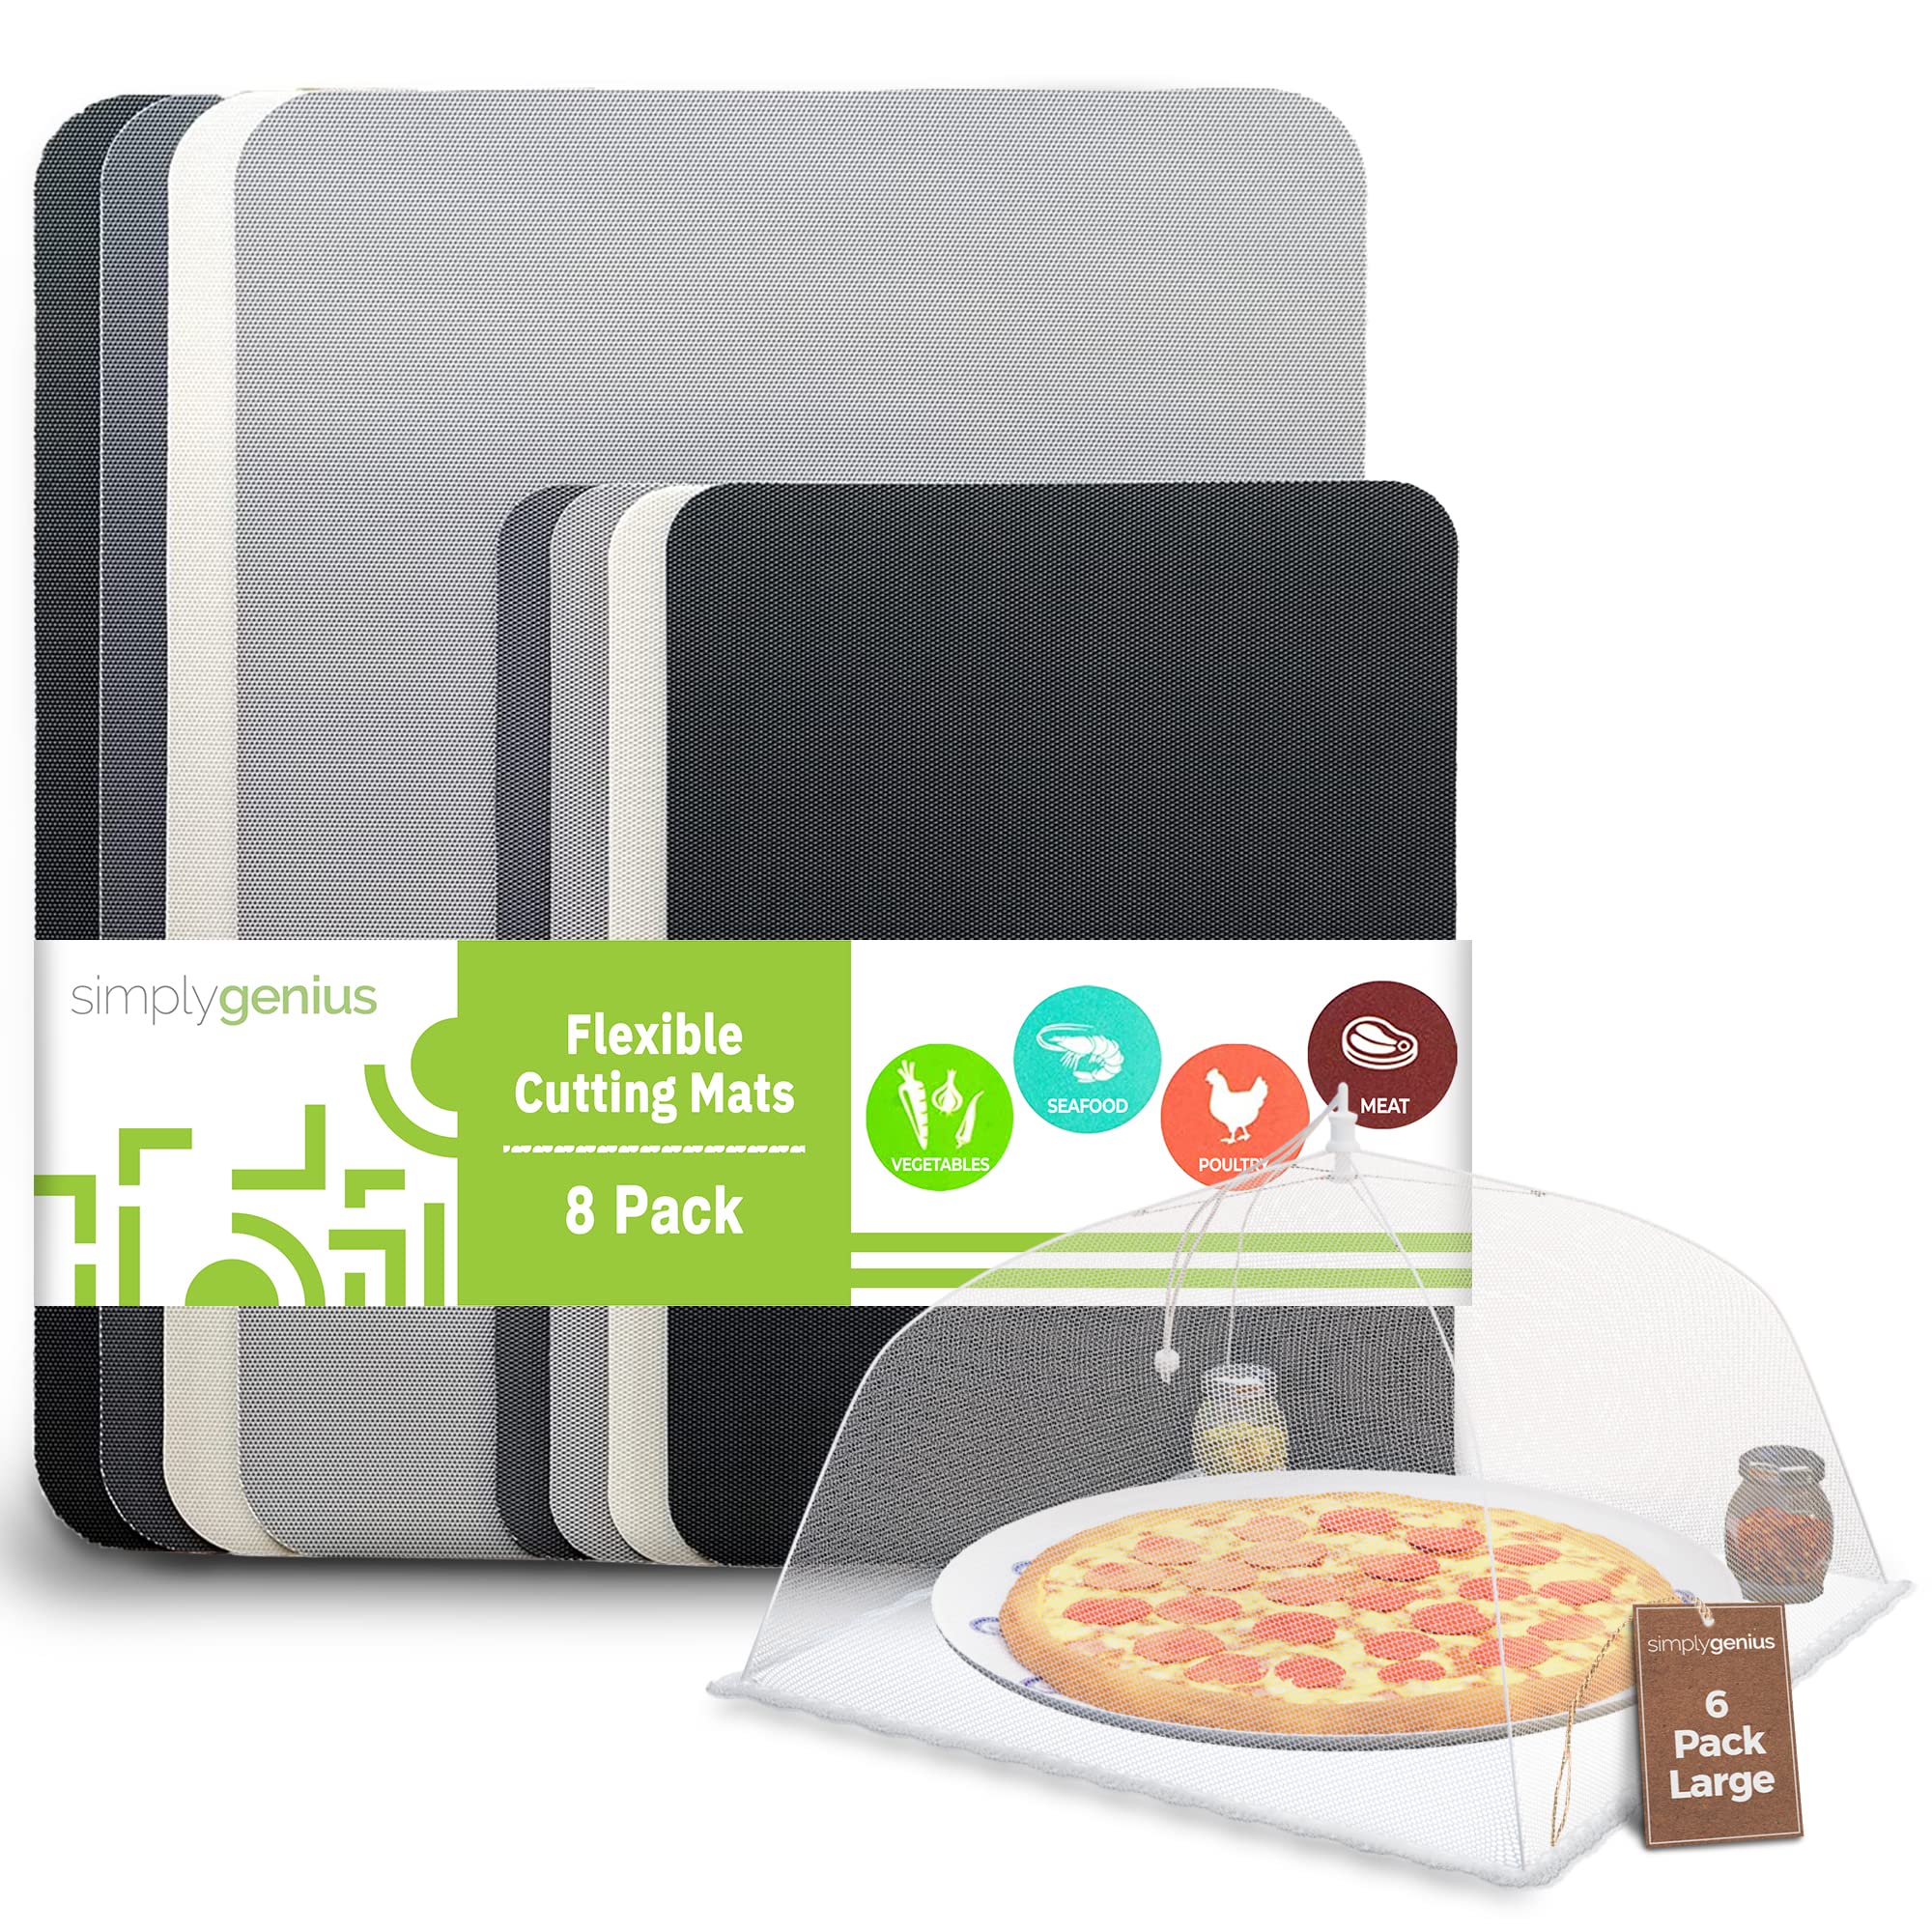 Simply Genius (Bundle) - Extra Thick Cutting Boards for Kitchen Prep, Non Slip Flexible Cutting Mat Set, Dishwasher Safe & Large and Tall 17x17 Pop-Up Mesh Food Covers Tent Umbrella for Outdoors